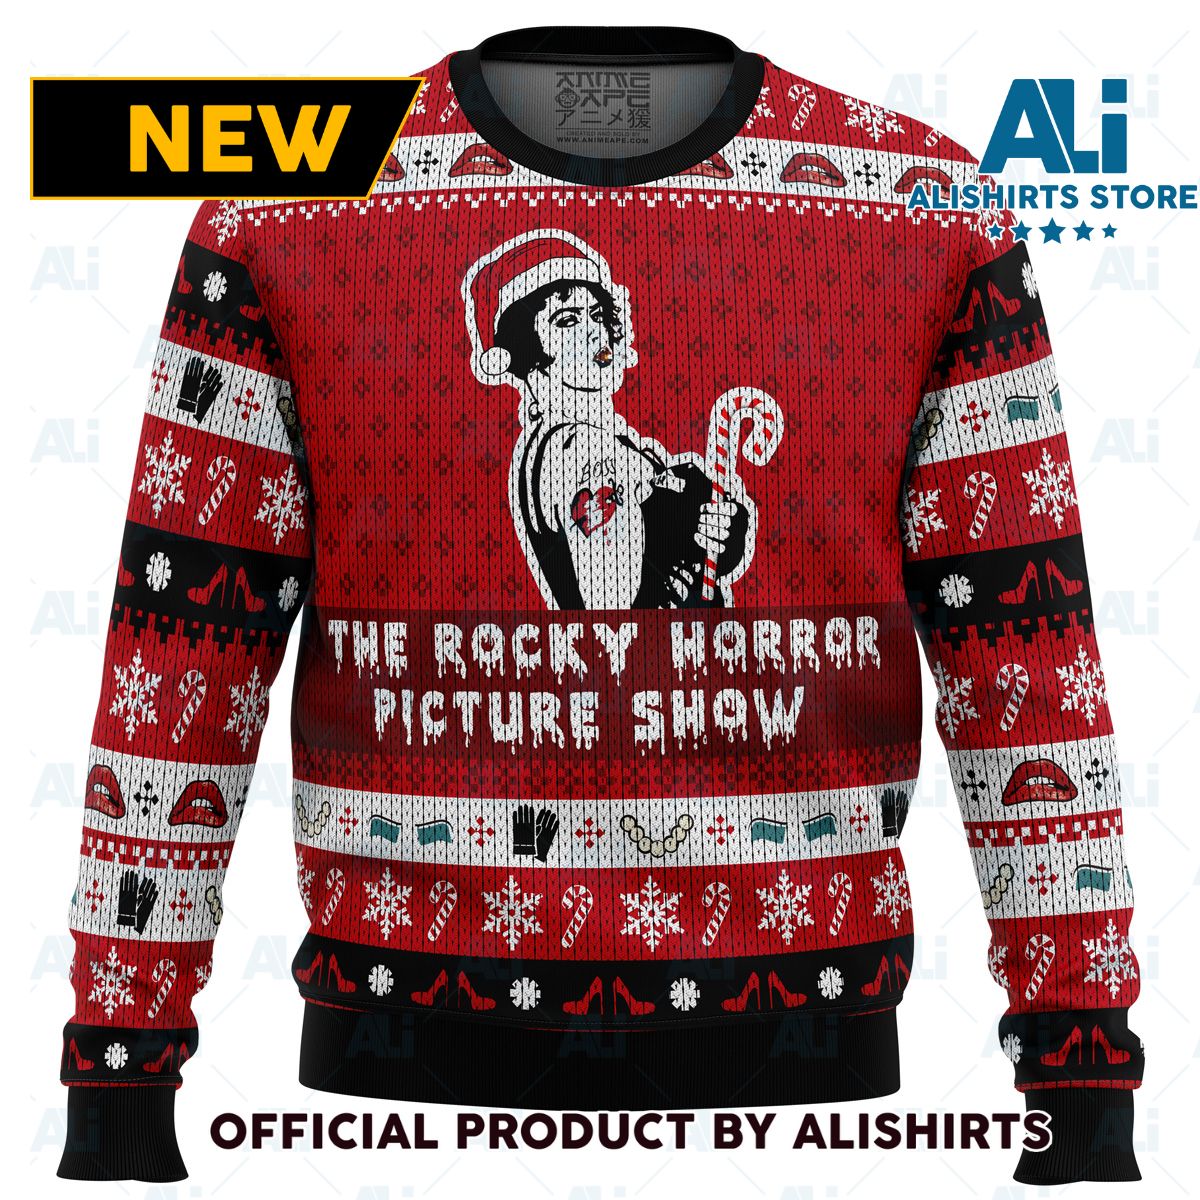 The Rocky Horror Picture Show Ugly Christmas Sweater